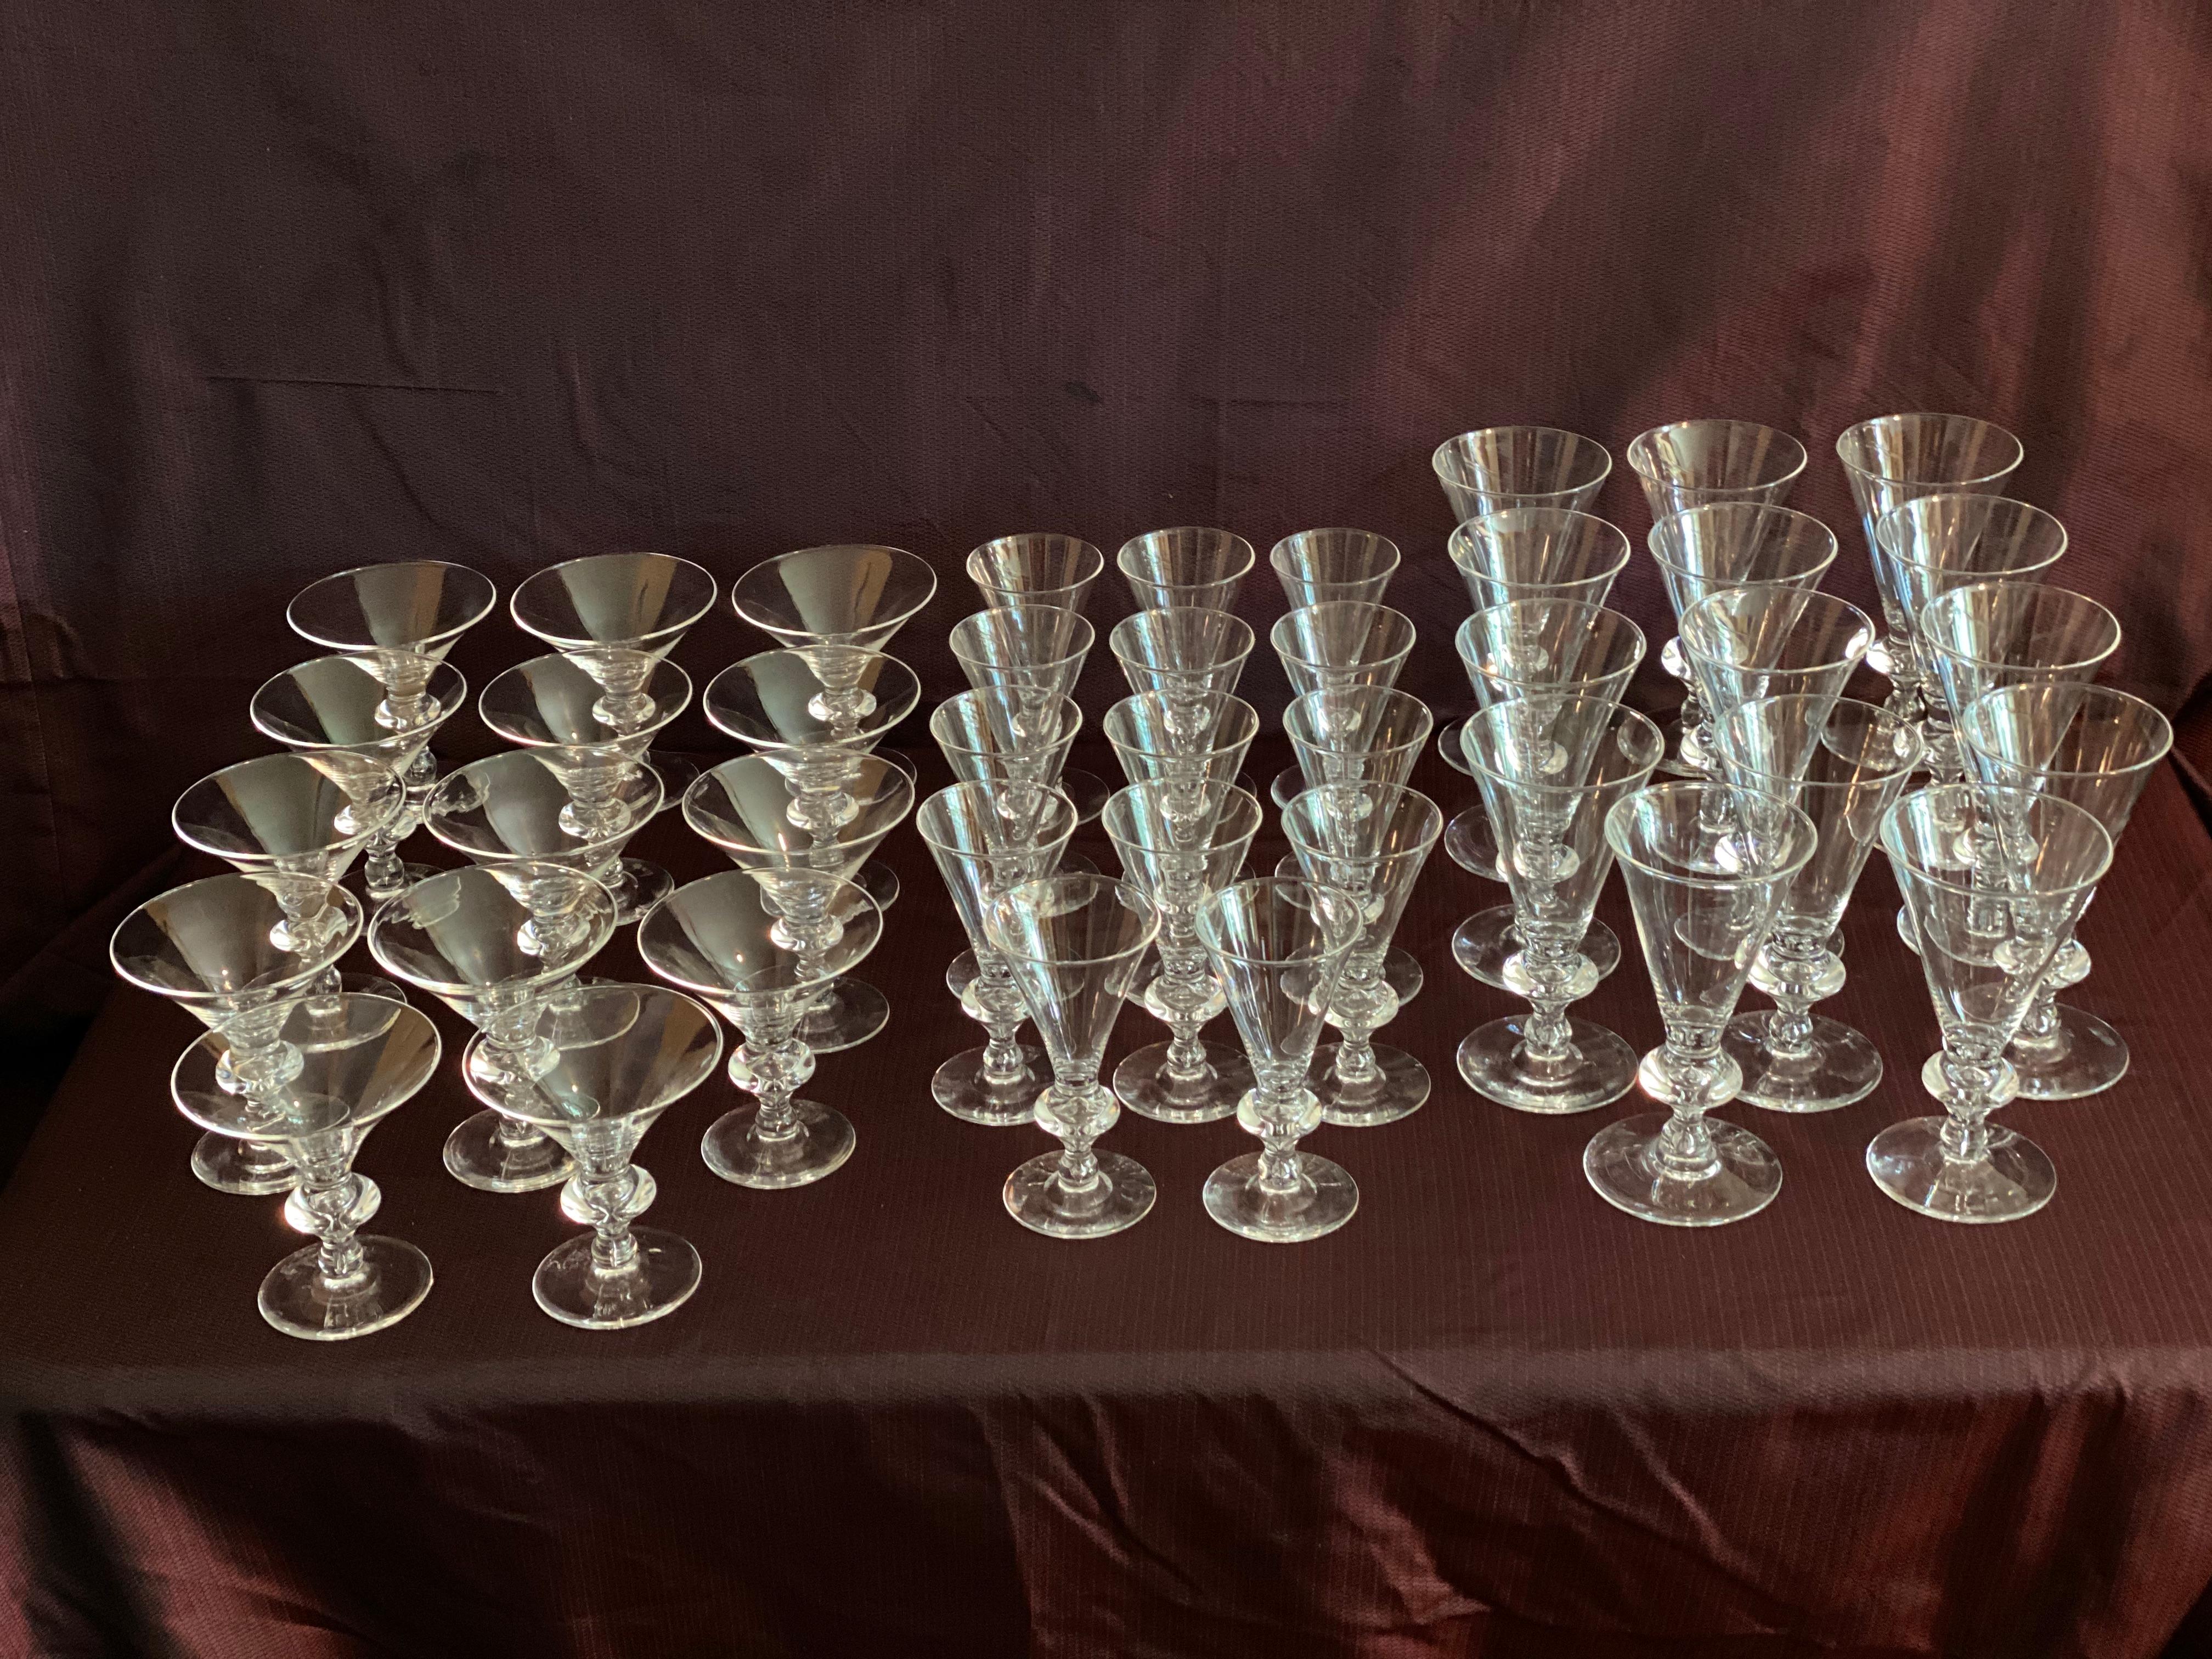 A set of 42 glasses, 14 red wine, 14 white wine, 14 martini glasses, all in perfect condition,
all signed in diamond script on bottom of base.